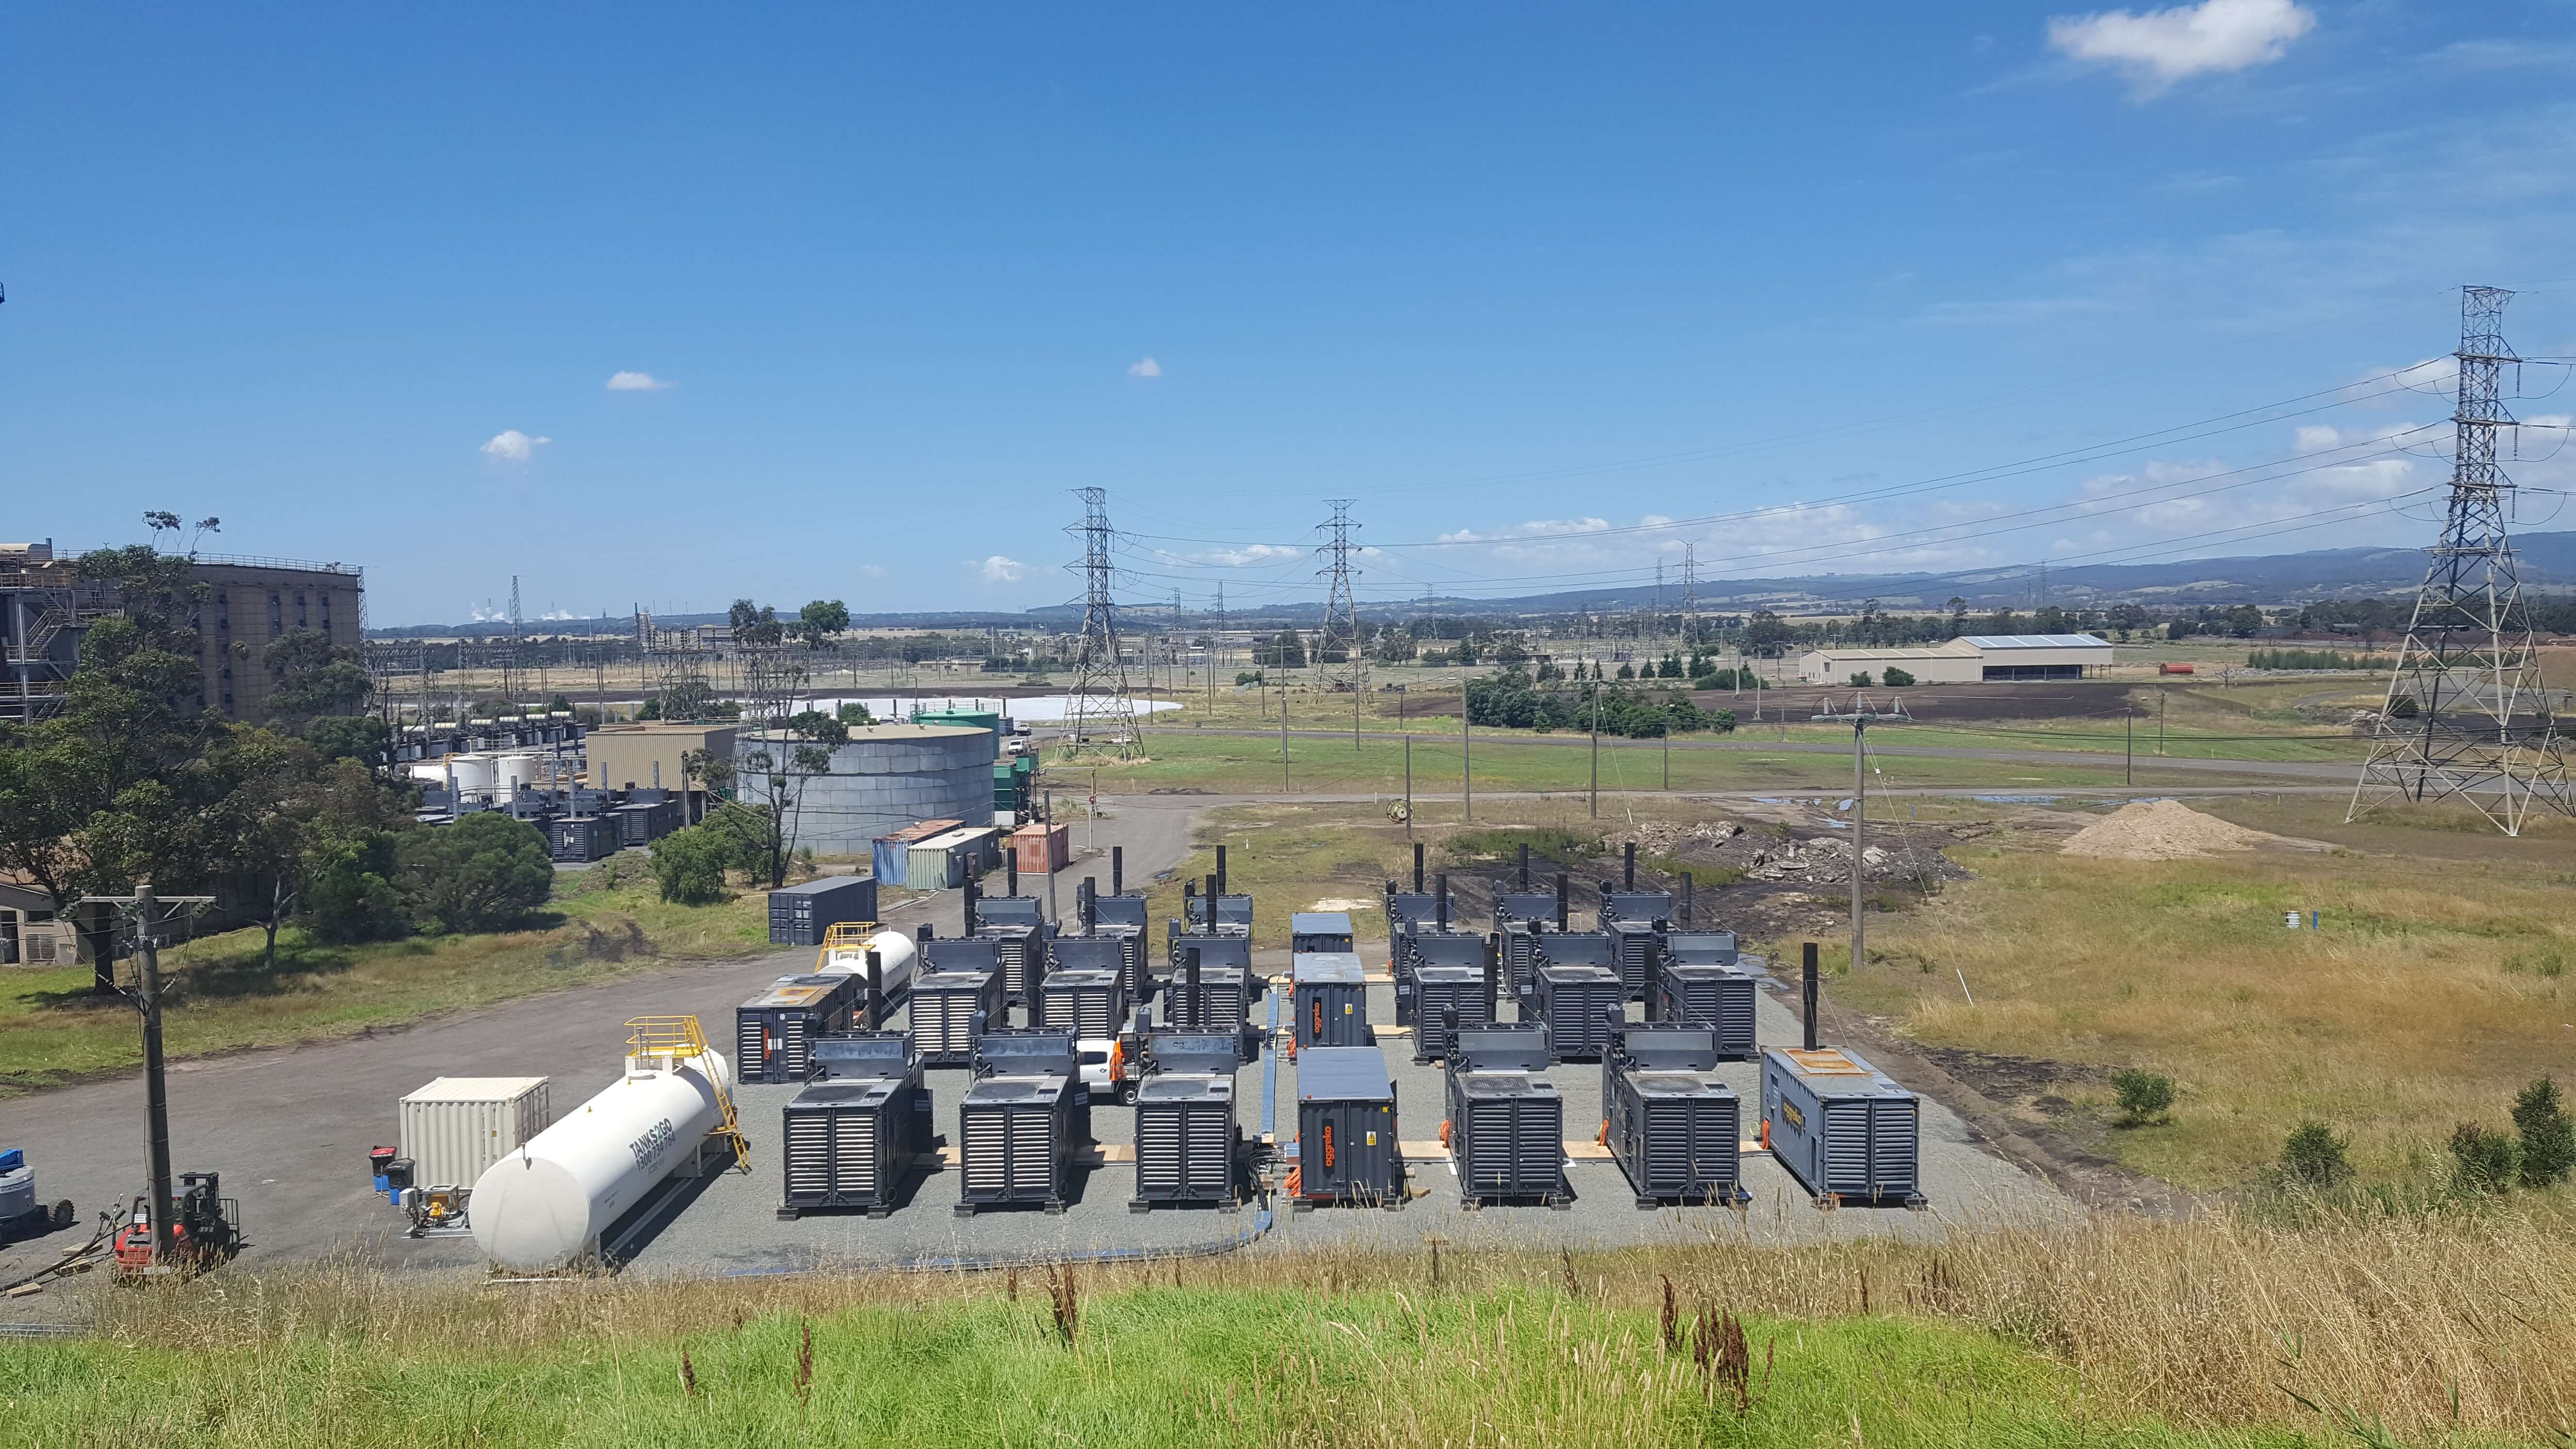 Temporary Power Station at EBAC site